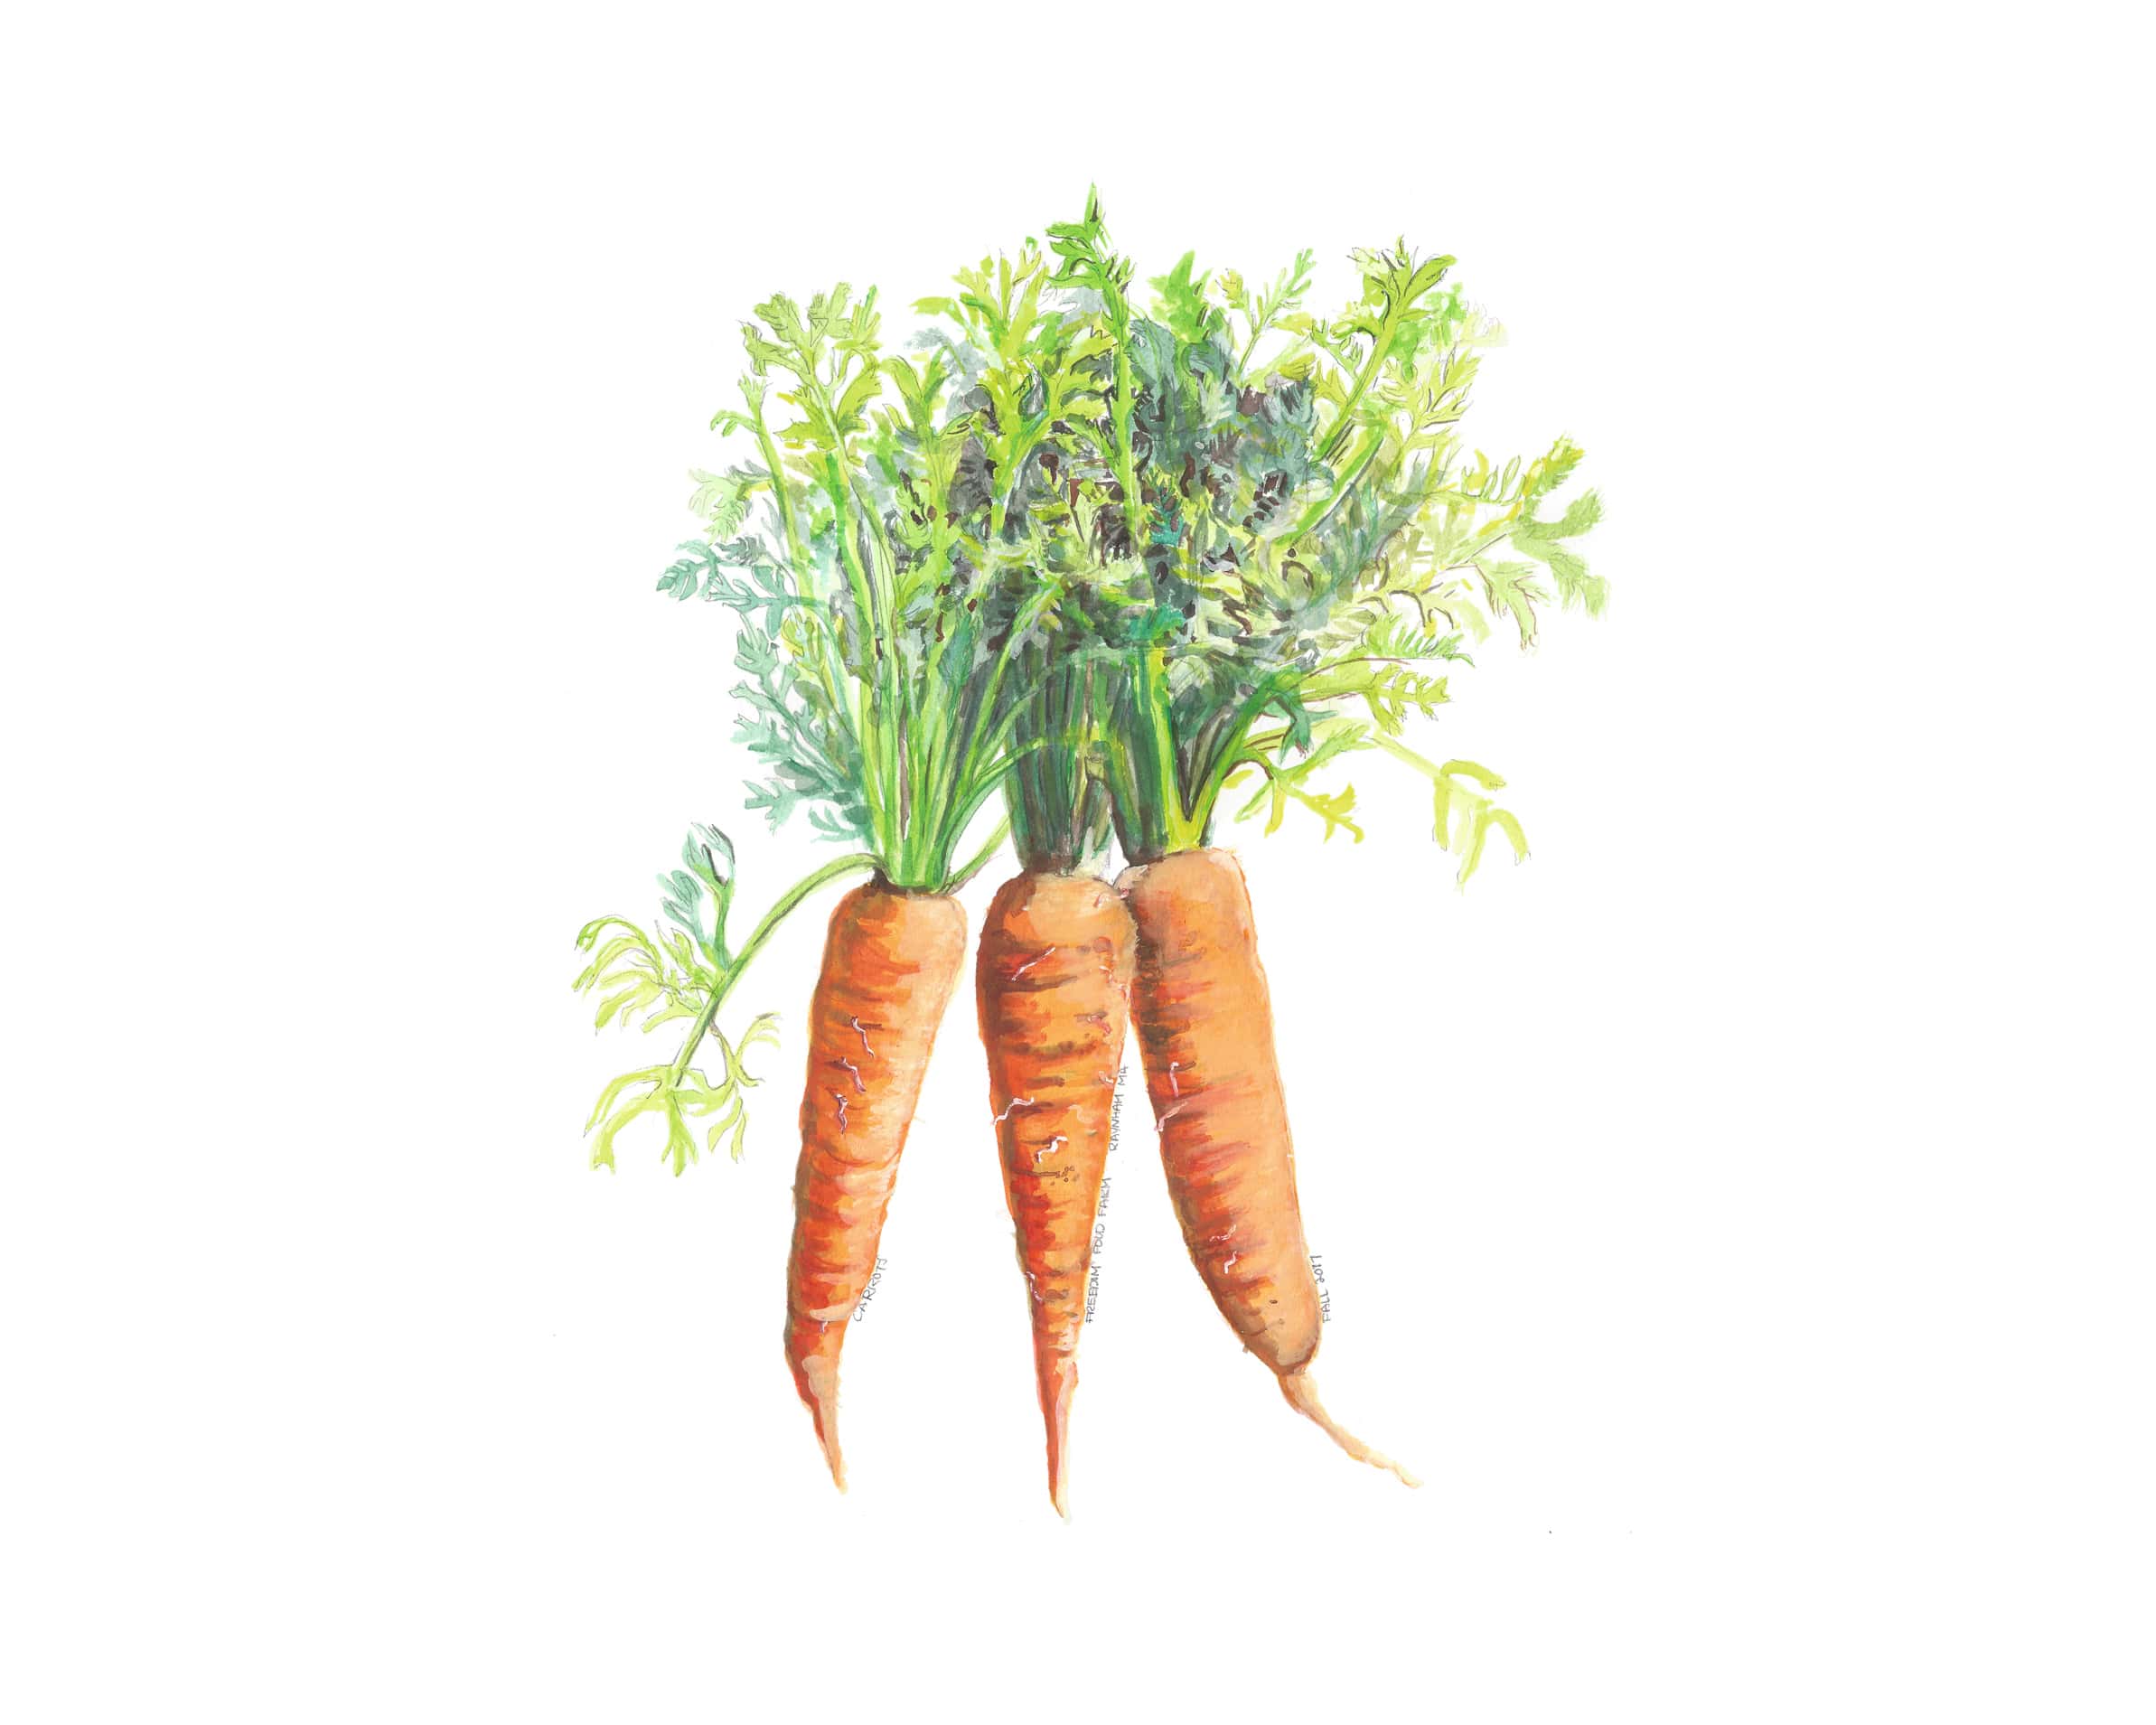 Carrots by Nichole Speciale